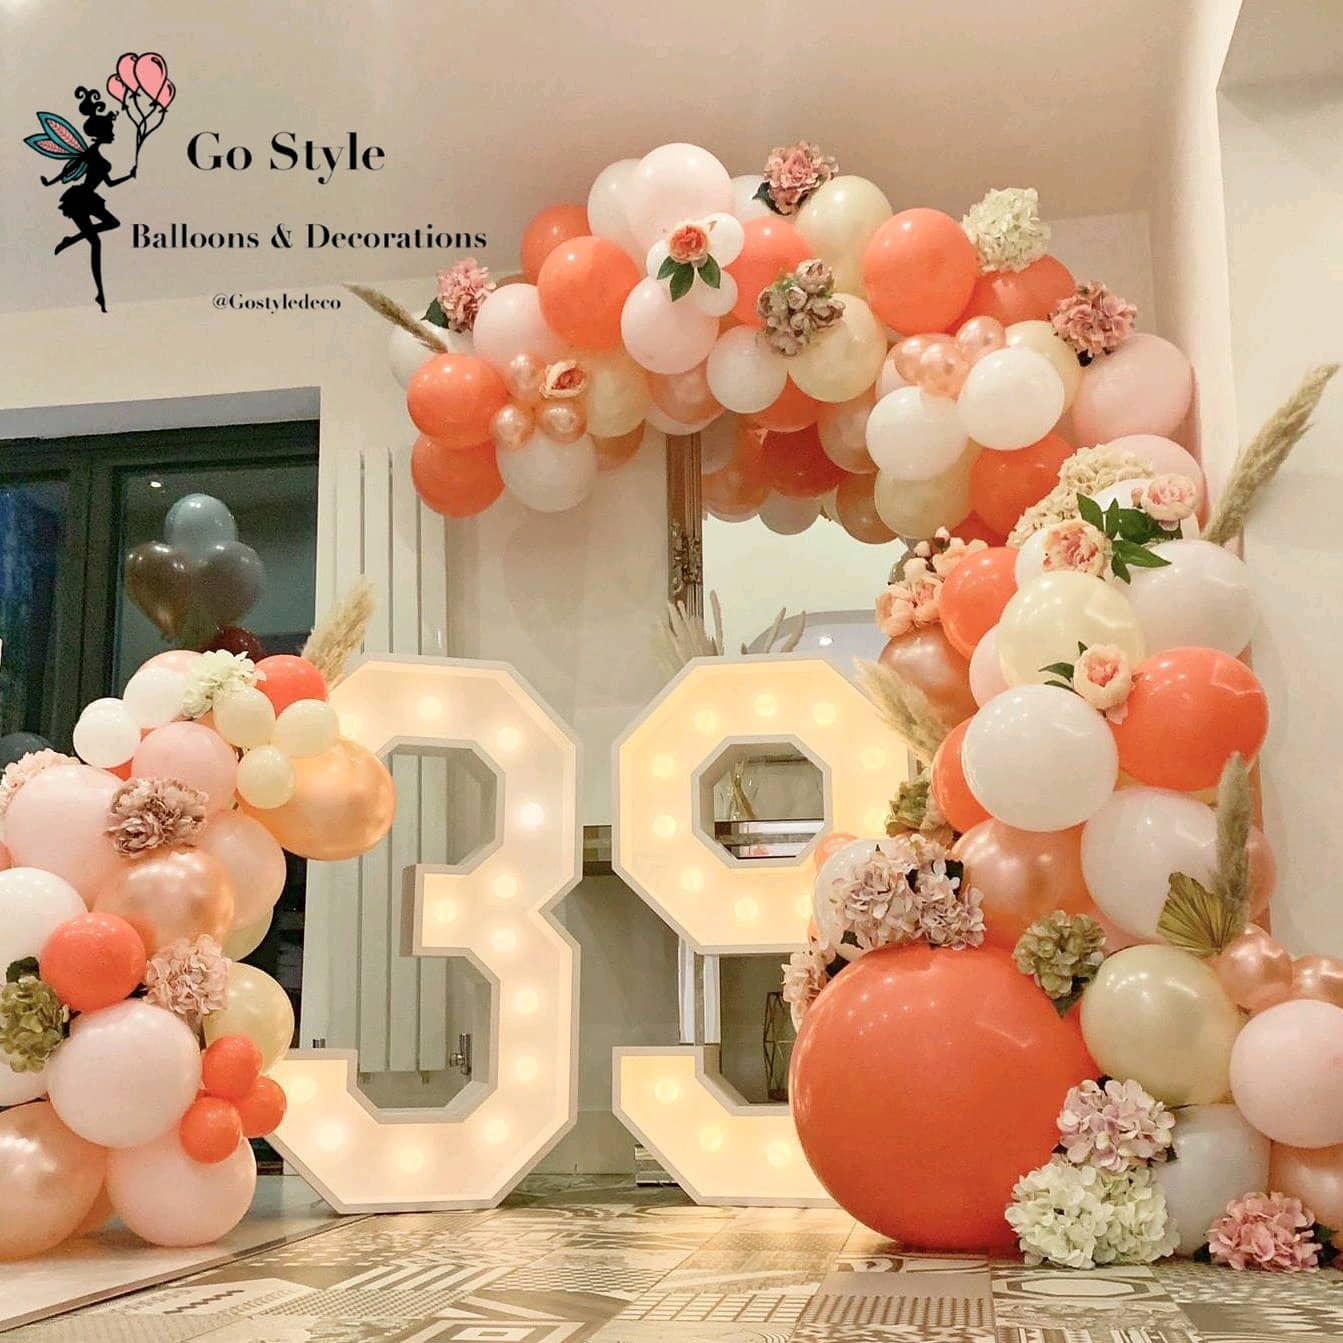 Go Style Balloons & Decorations